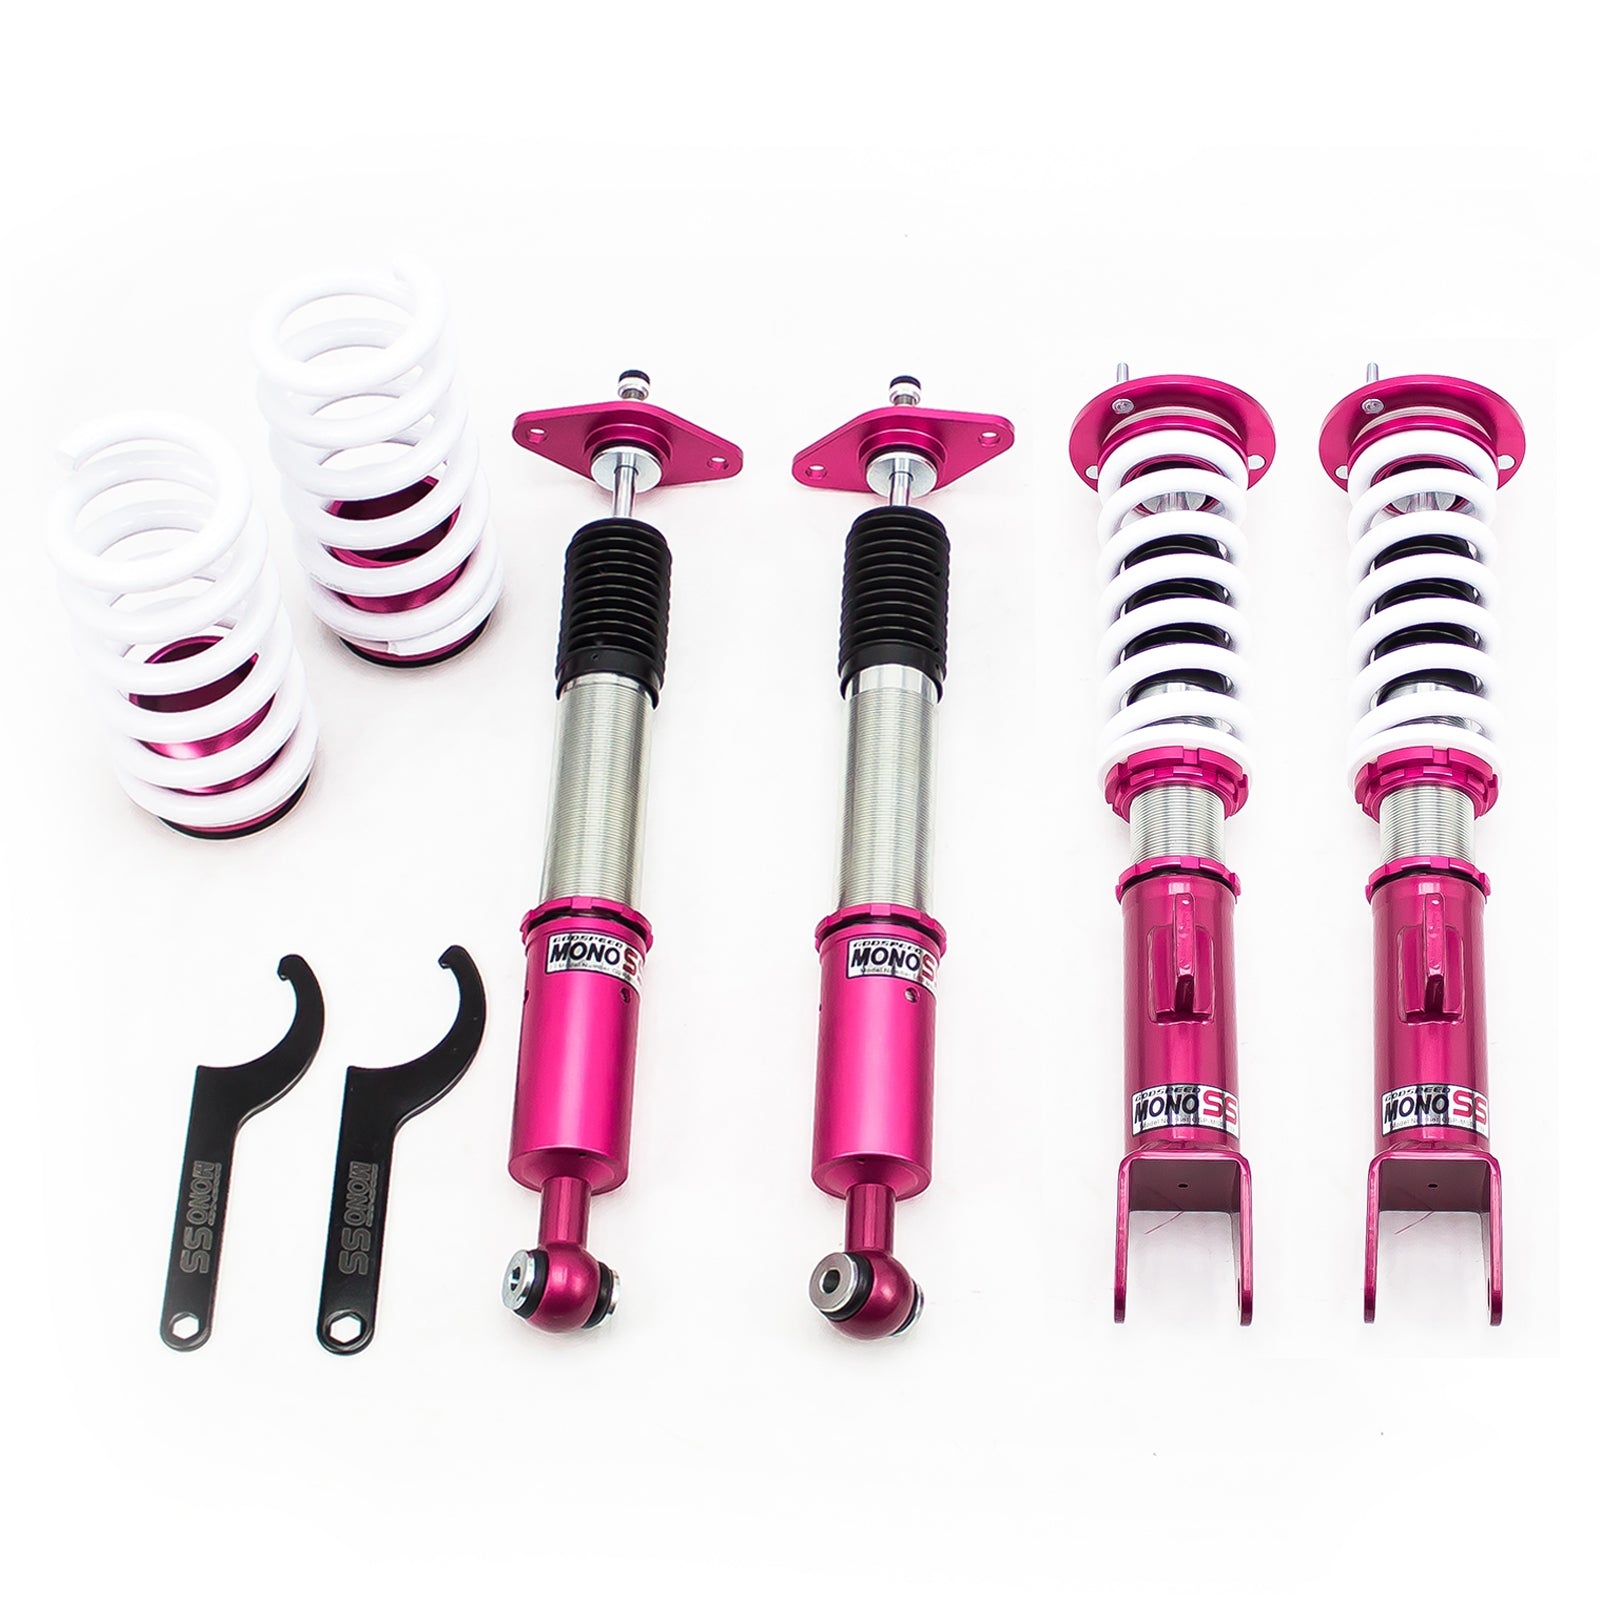 Godspeed MSS0139-D MonoSS Coilover Lowering Kit, Fully Adjustable, Ride Height, Spring Tension And 16 Click Damping, Dodge Magnum 2005-08